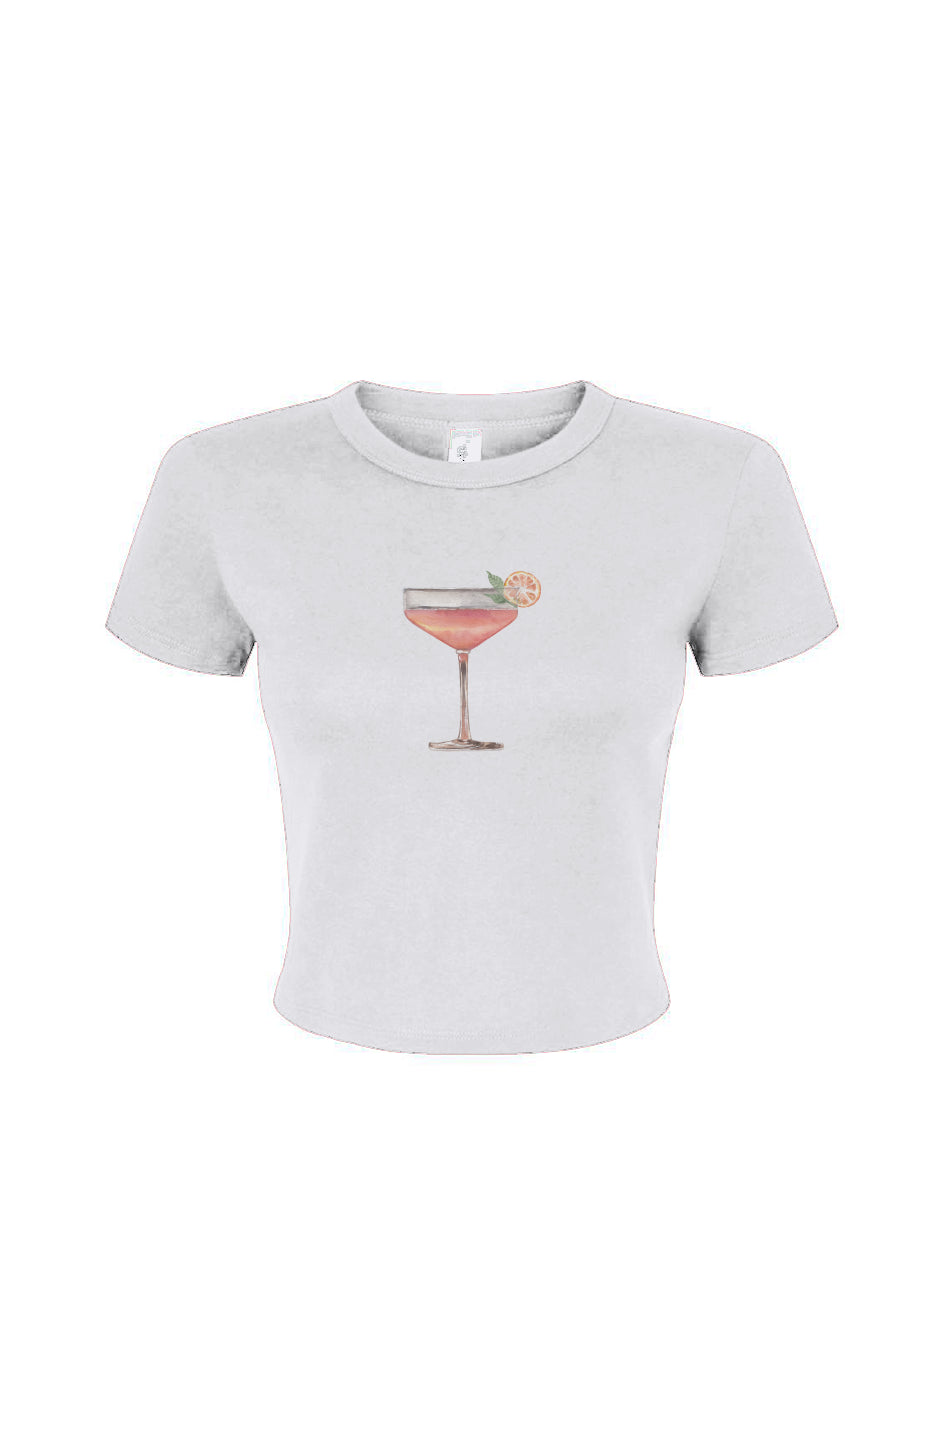 Grapefruit Cocktail Fitted Baby Tee